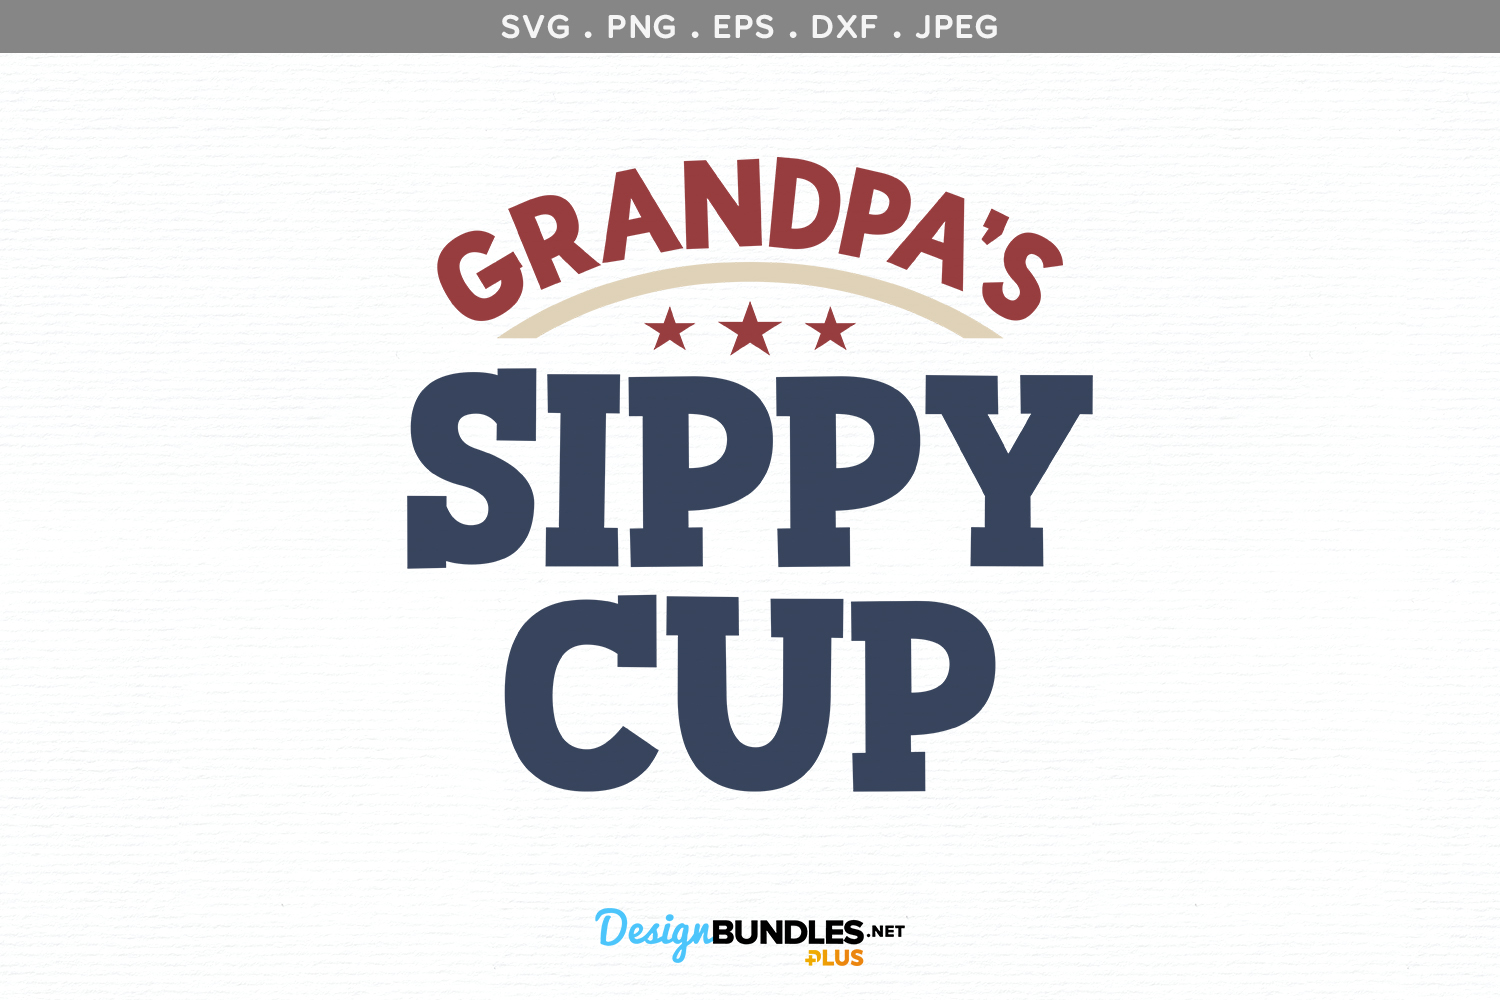 Download Grandpa's Sippy Cup - svg, printable